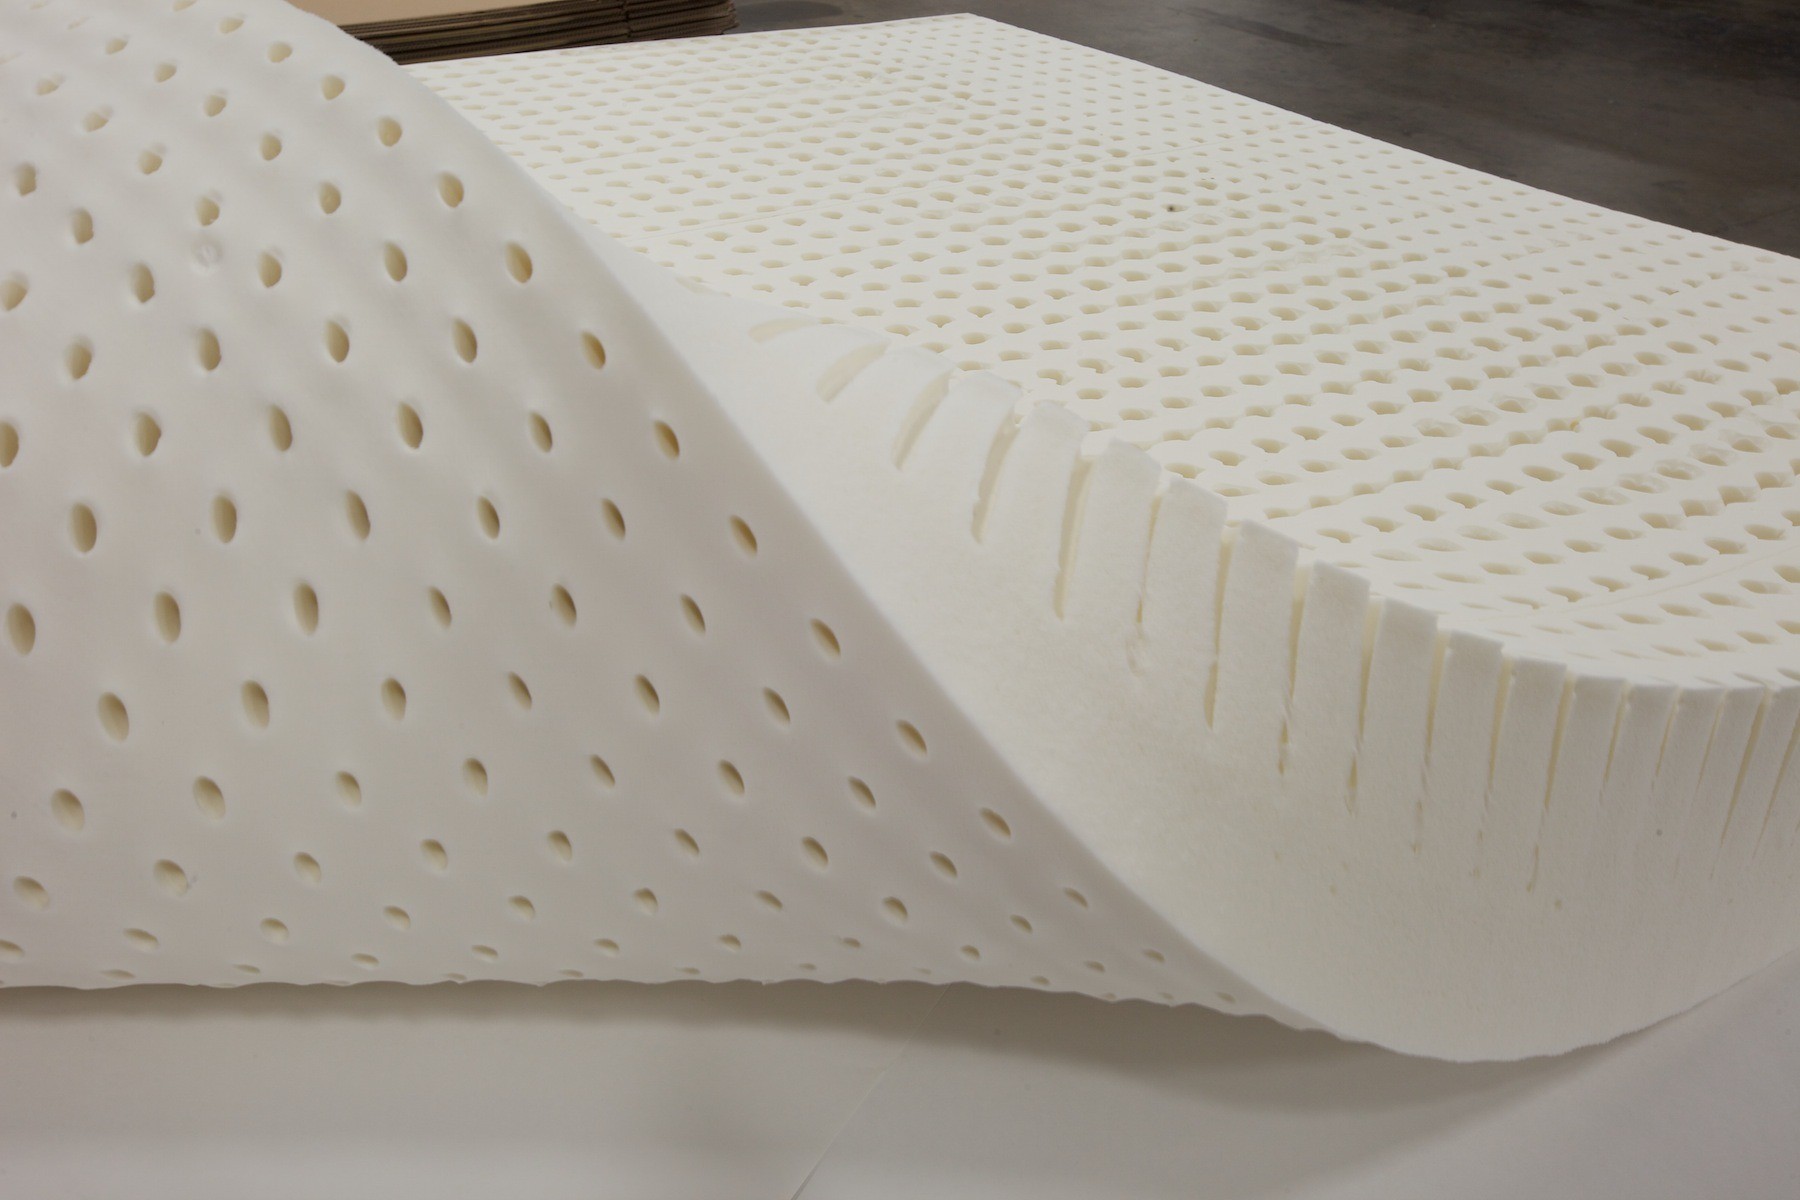 latex foam mattress pros and cons